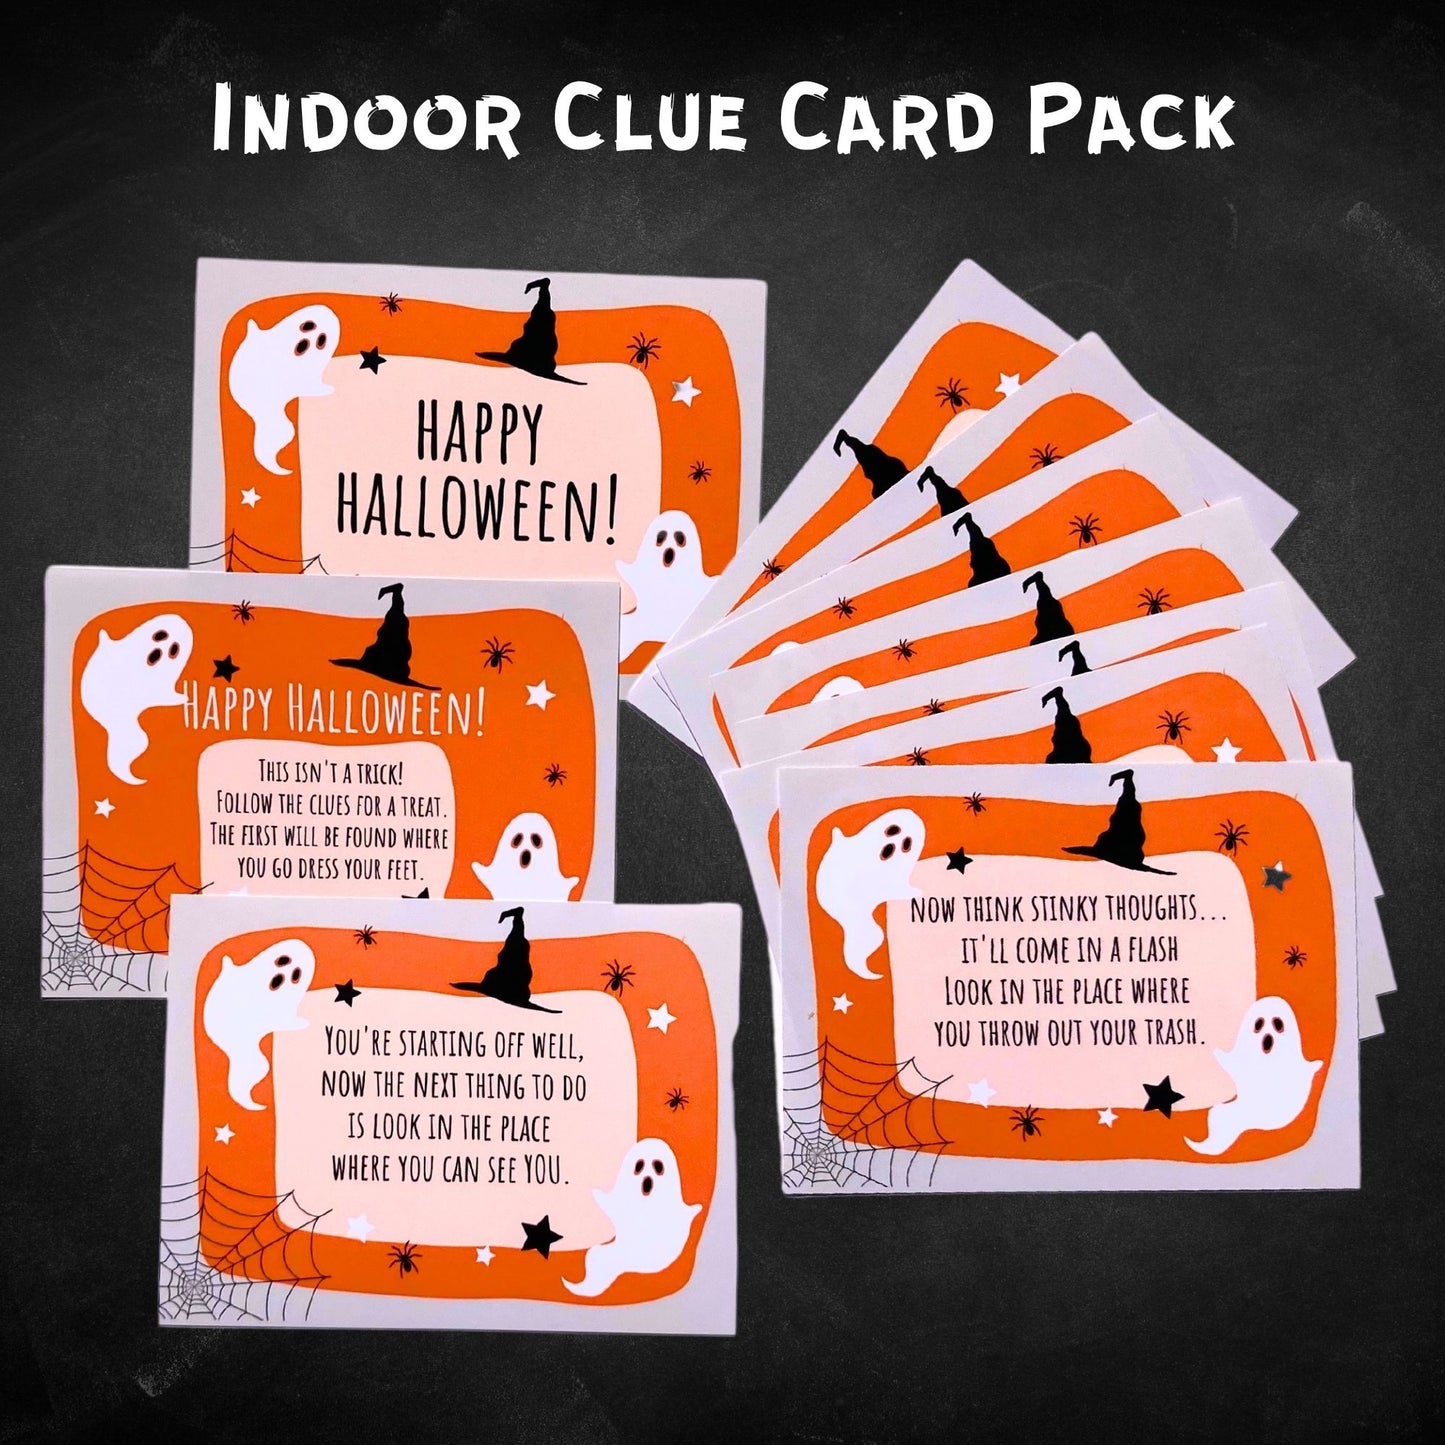 A close up view of the indoor clue card pack cards